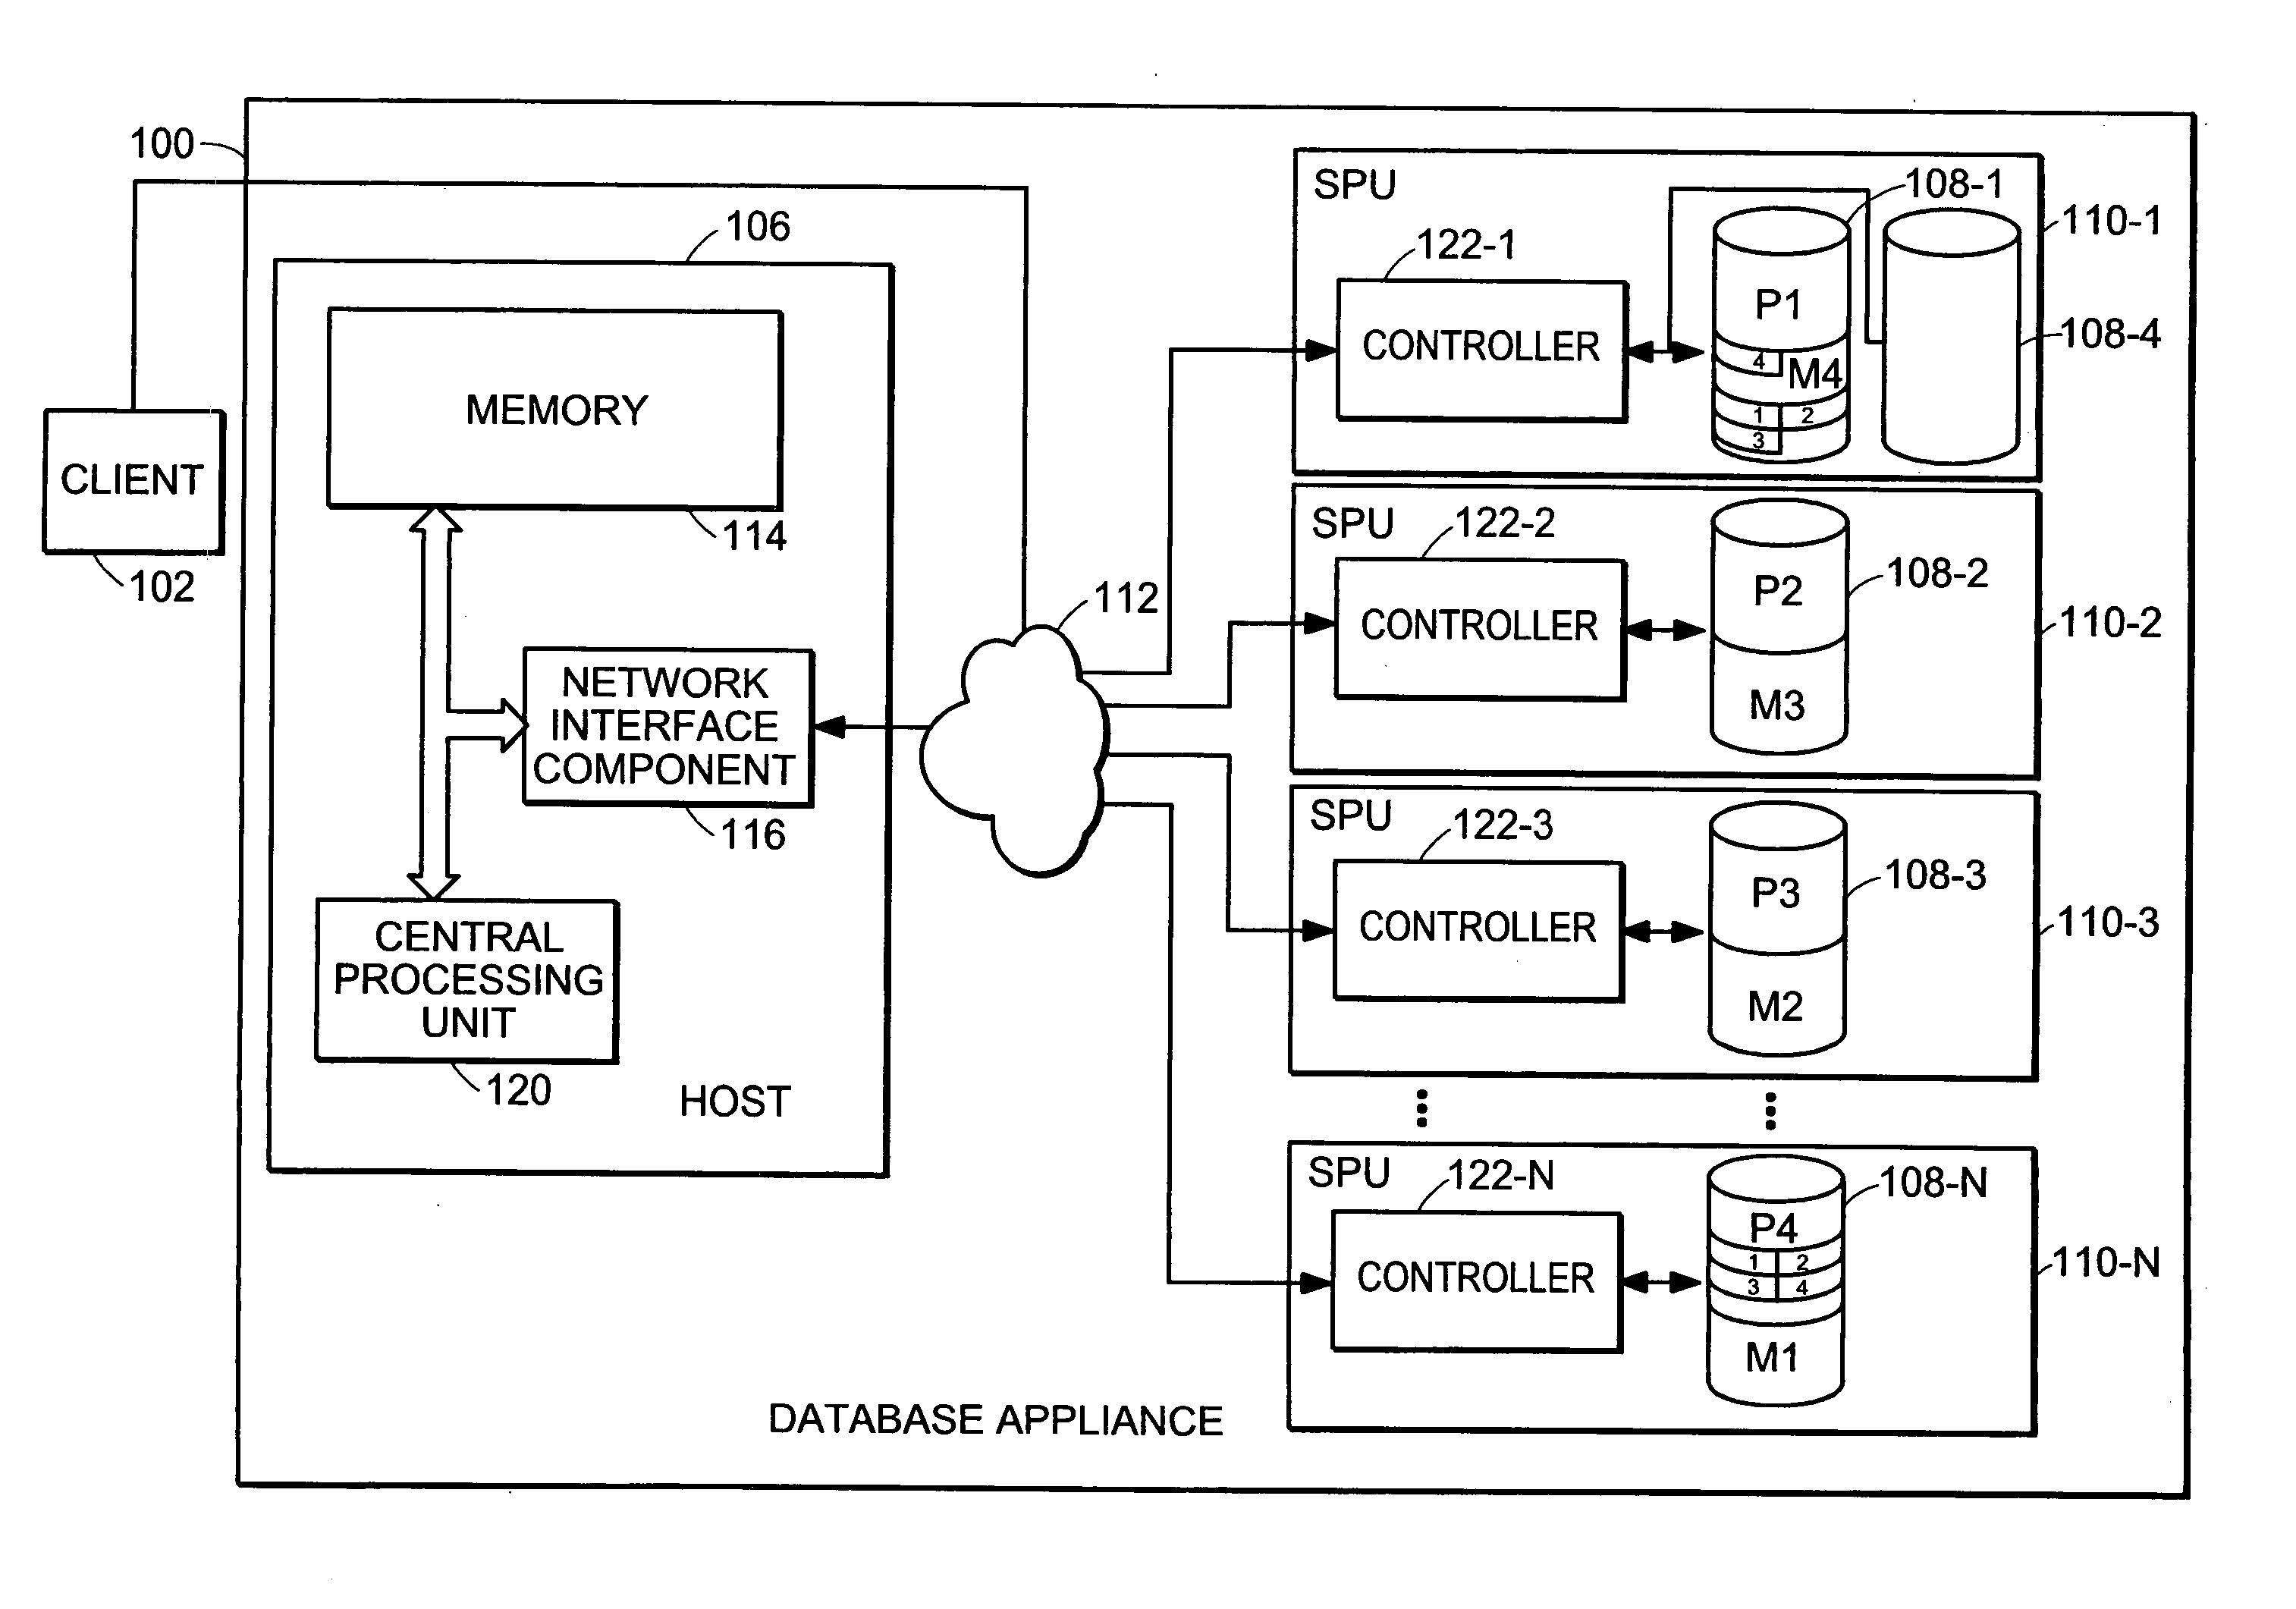 Disk mirror architecture for database appliance with locally balanced regeneration